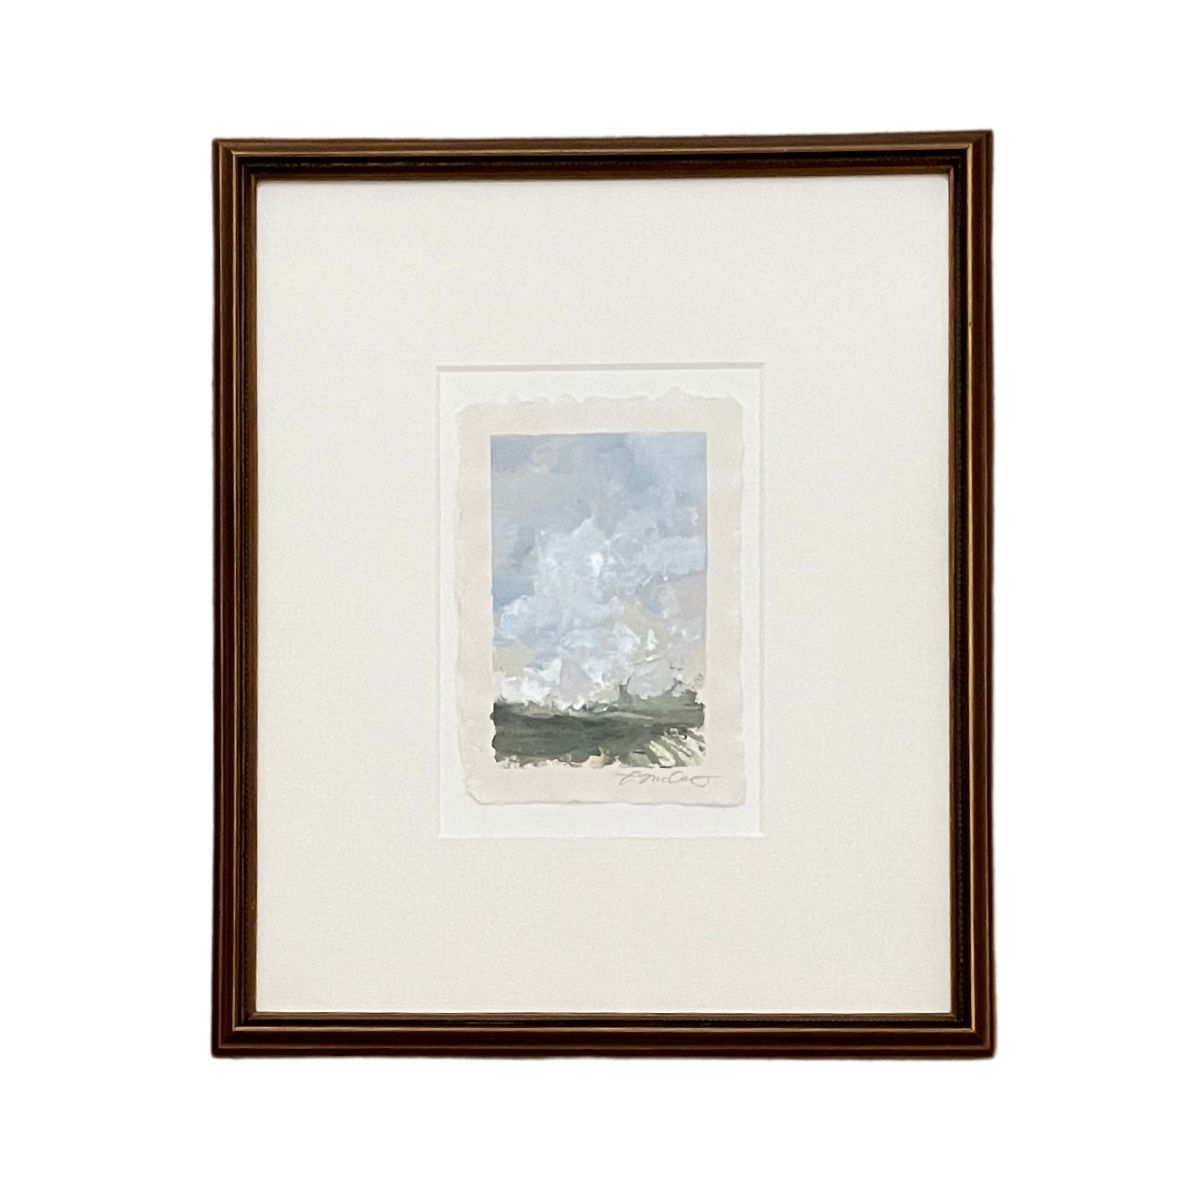 Framed Landscape by Laura McCarty #9